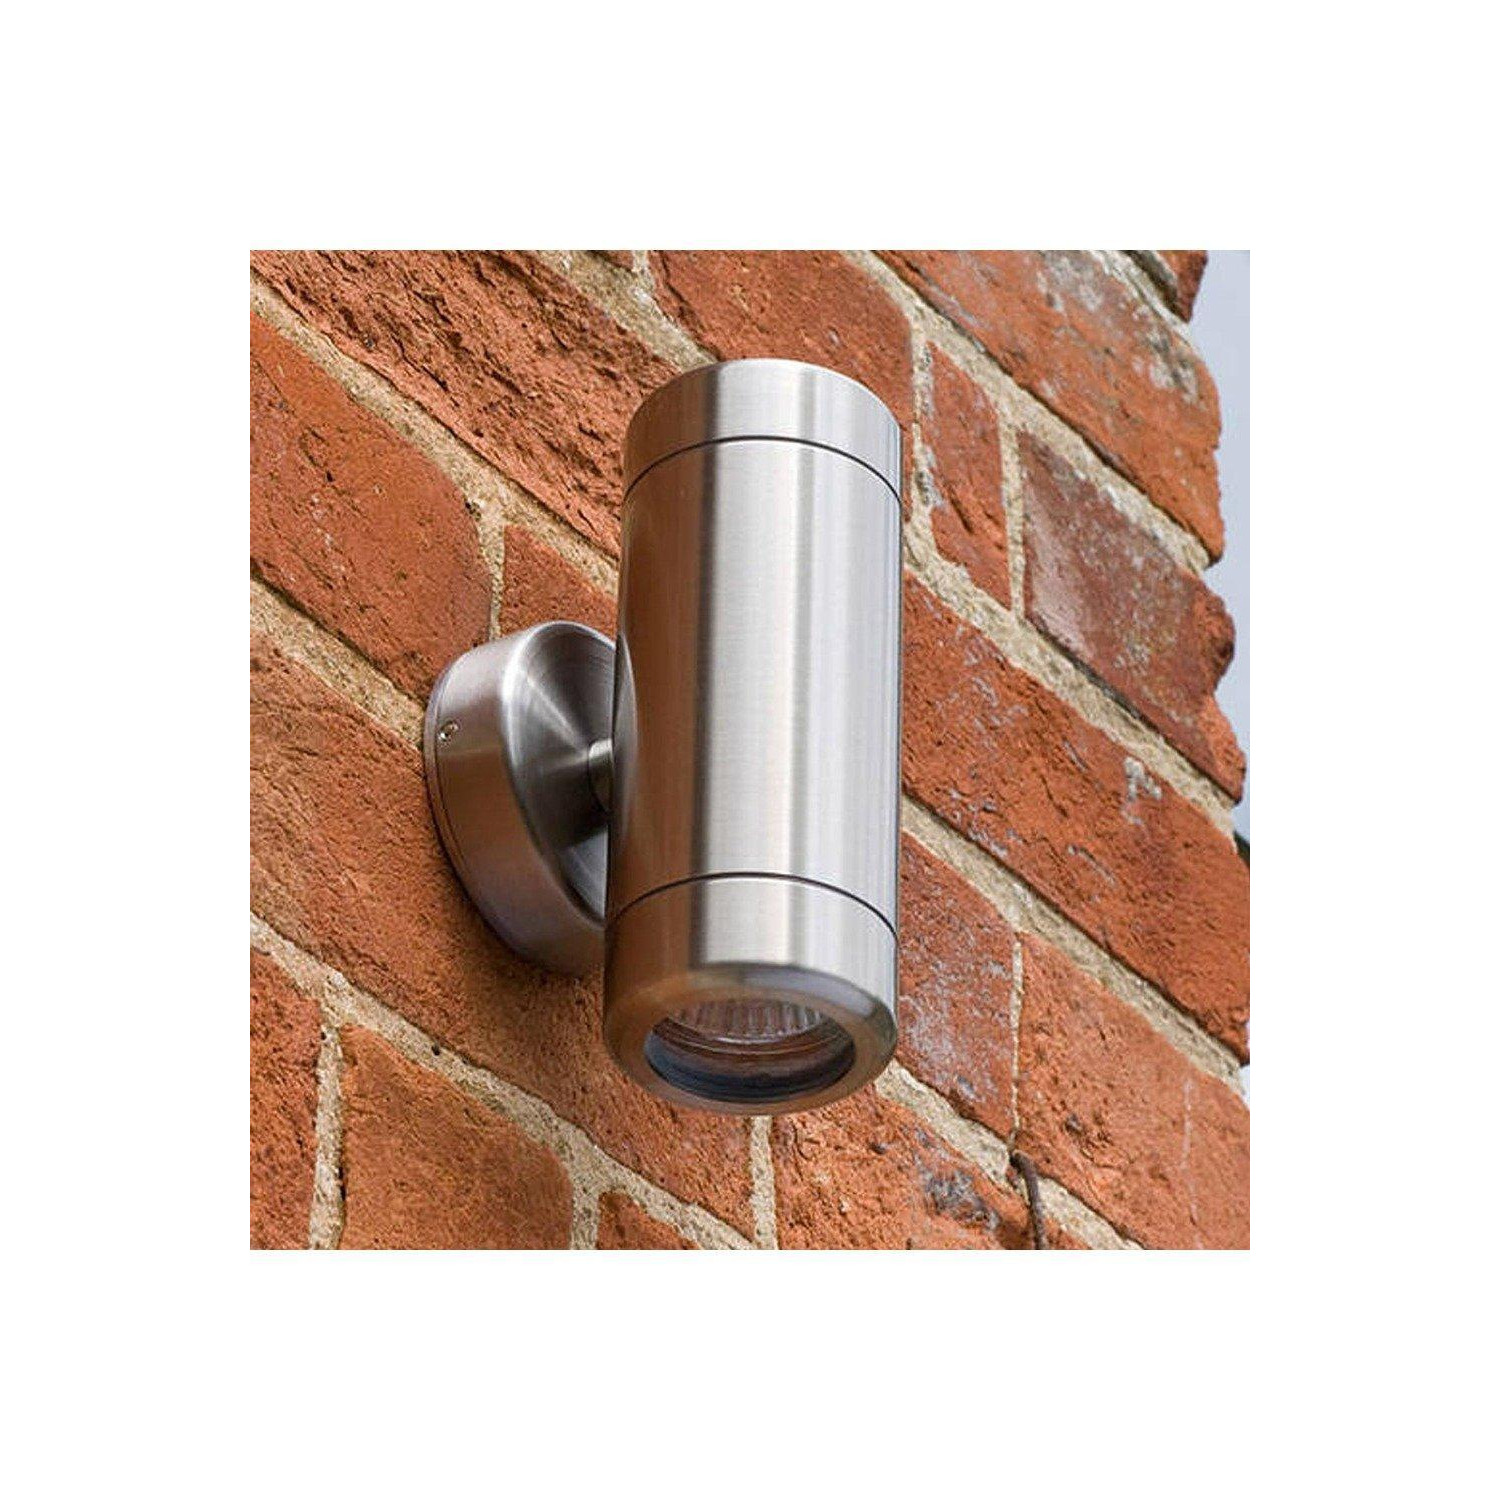 'Sonia' Stainless Steel Double Outdoor Wall Light - image 1